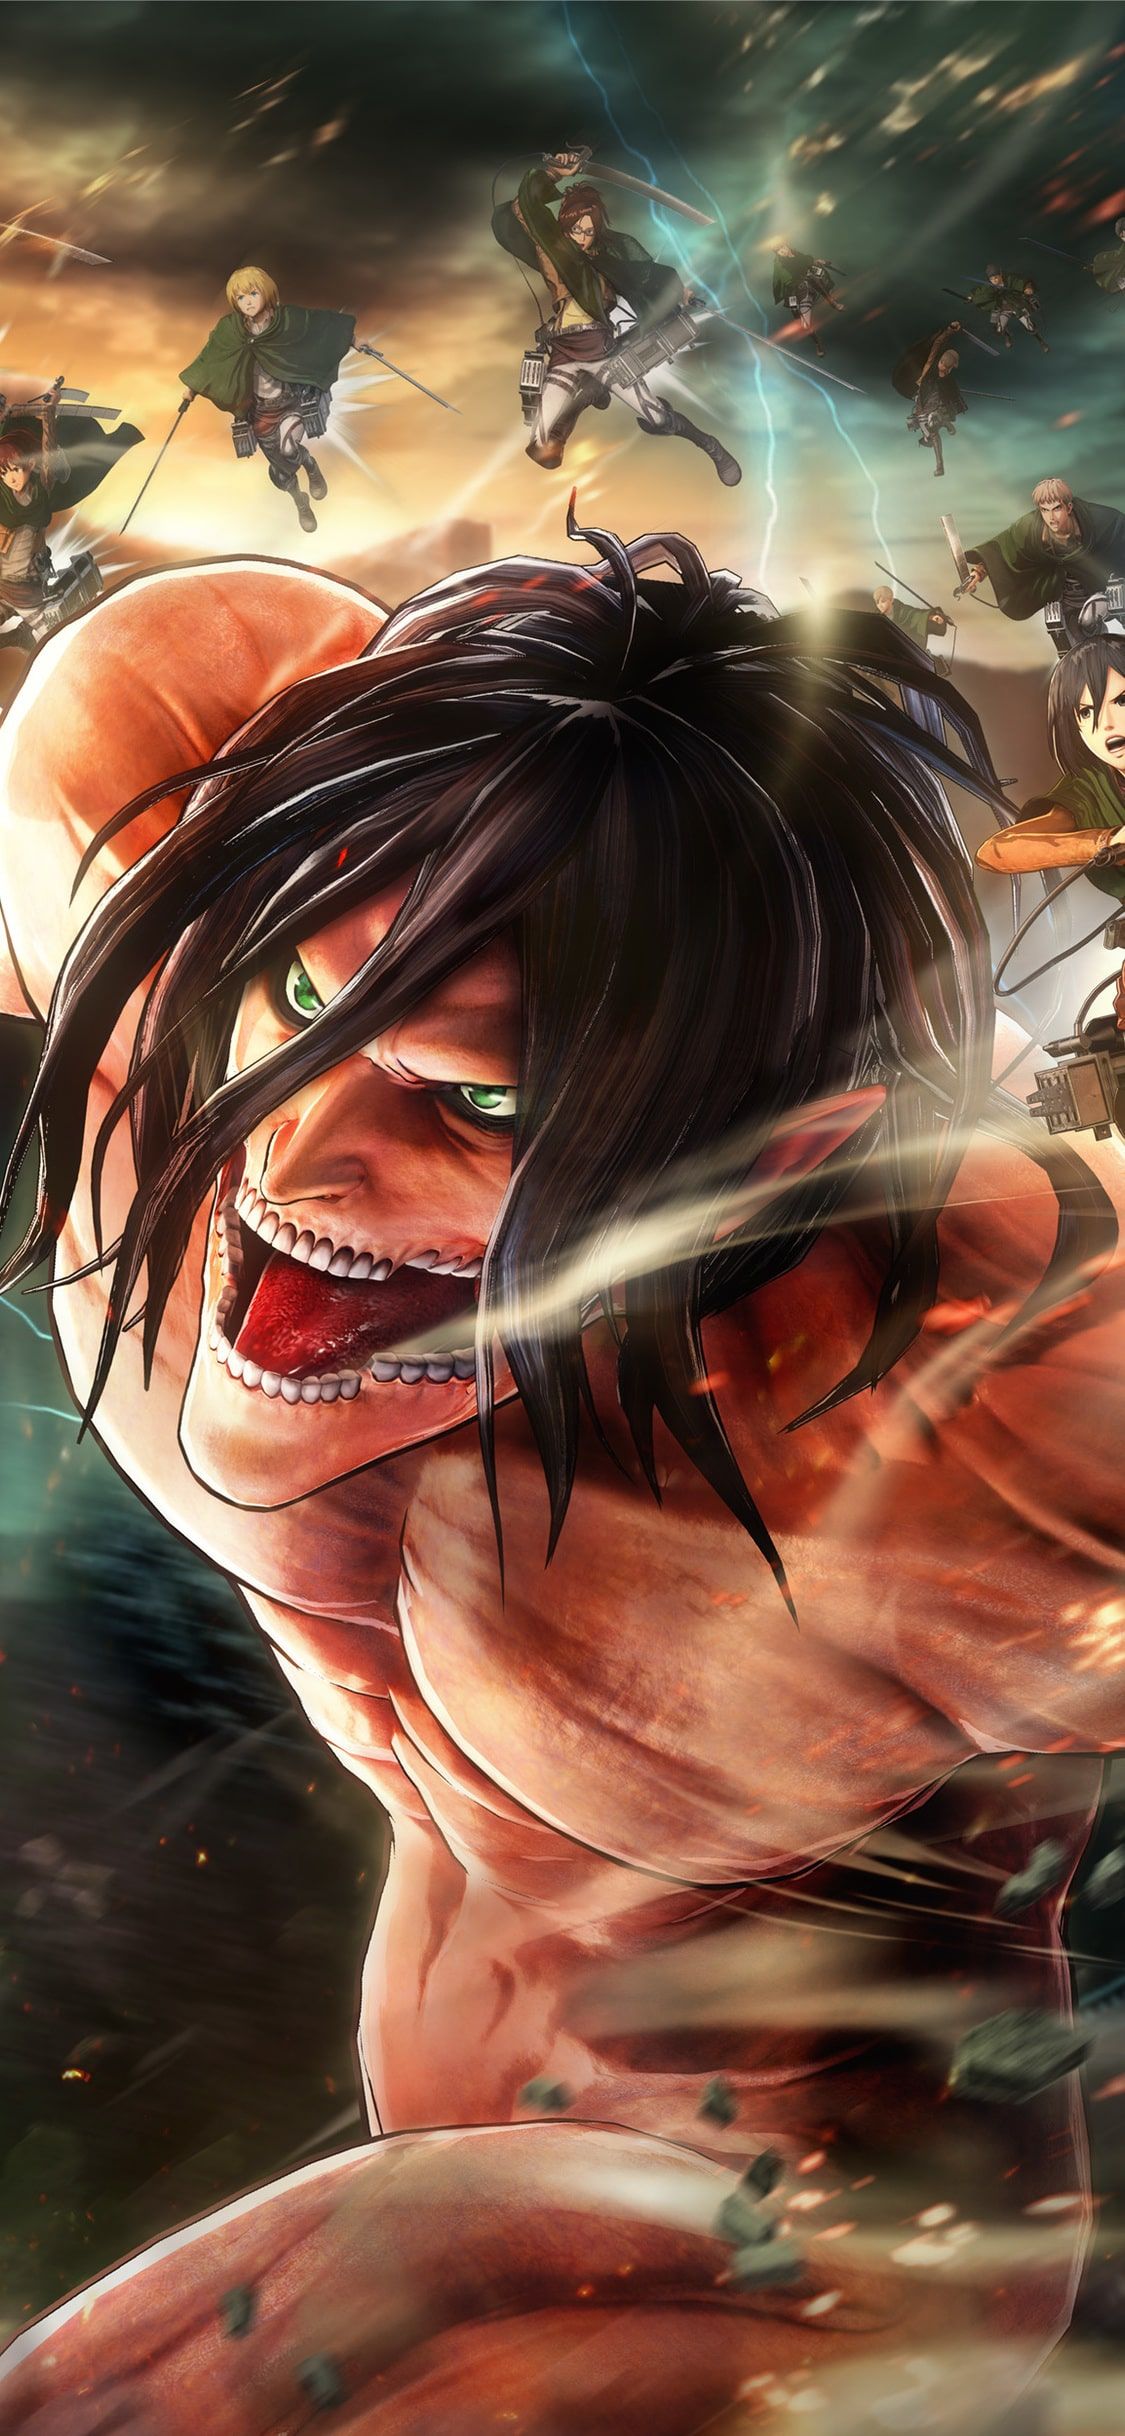 Attack On Titan Android Wallpaper Free HD